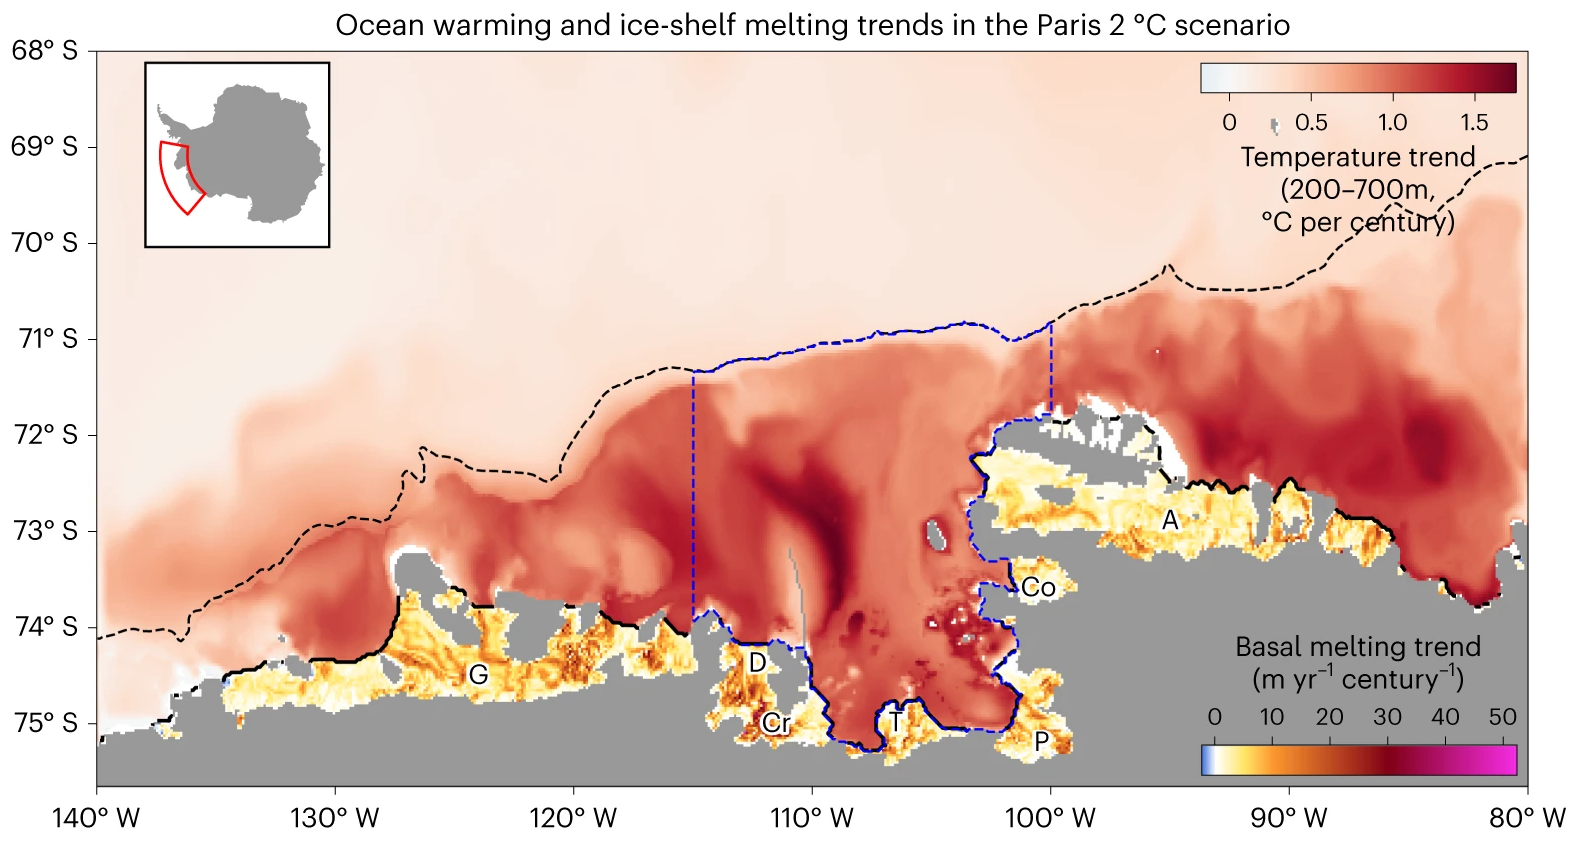 Map of ensemble mean trends in ocean temperature and ice-shelf basal melting in the West Antarctic Ice Sheet (WAIS) for the Paris 2°C scenario. Temperature is averaged over the depth range 200–700 m. Trends are calculated at each point using annually averaged fields from 2006–2100. White regions indicate no significant trend. The Amundsen Sea region visualized here (latitude–longitude projection) is outlined in red in the inset map of Antarctica (polar stereographic projection). The black dashed line shows the 1,750 m depth contour of the continental shelf break and the blue dashed line outlines the continental shelf region used for analysis. Labels denote ice shelves (G, Getz; D, Dotson; Cr, Crosson; T, Thwaites; P, Pine Island; Co, Cosgrove; A, Abbot). Graphic: Naughten, et al., 2023 / Nature